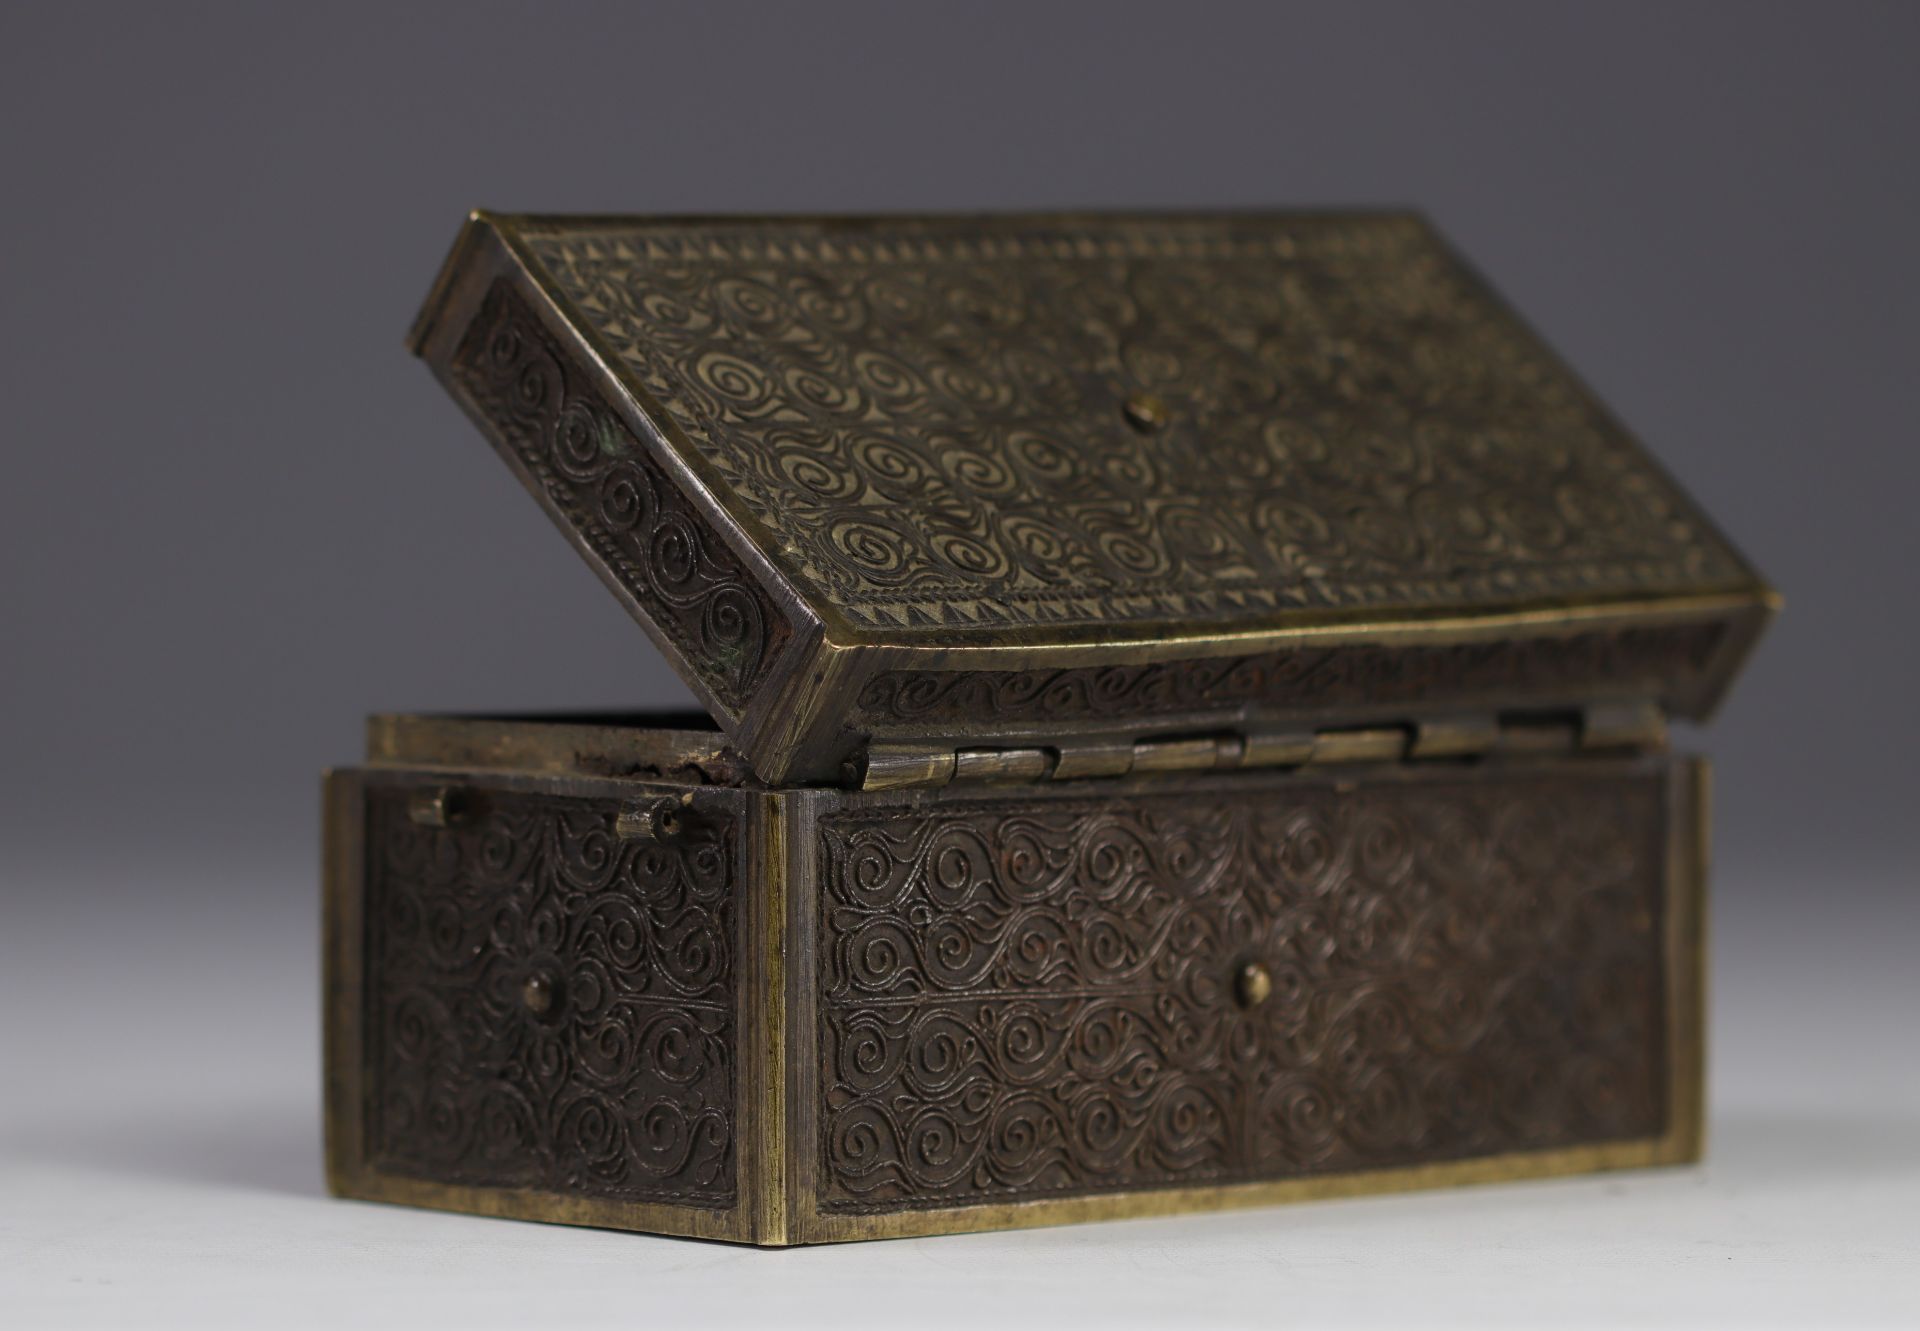 Persia / India - Bronze box decorated with spirals - Image 2 of 5